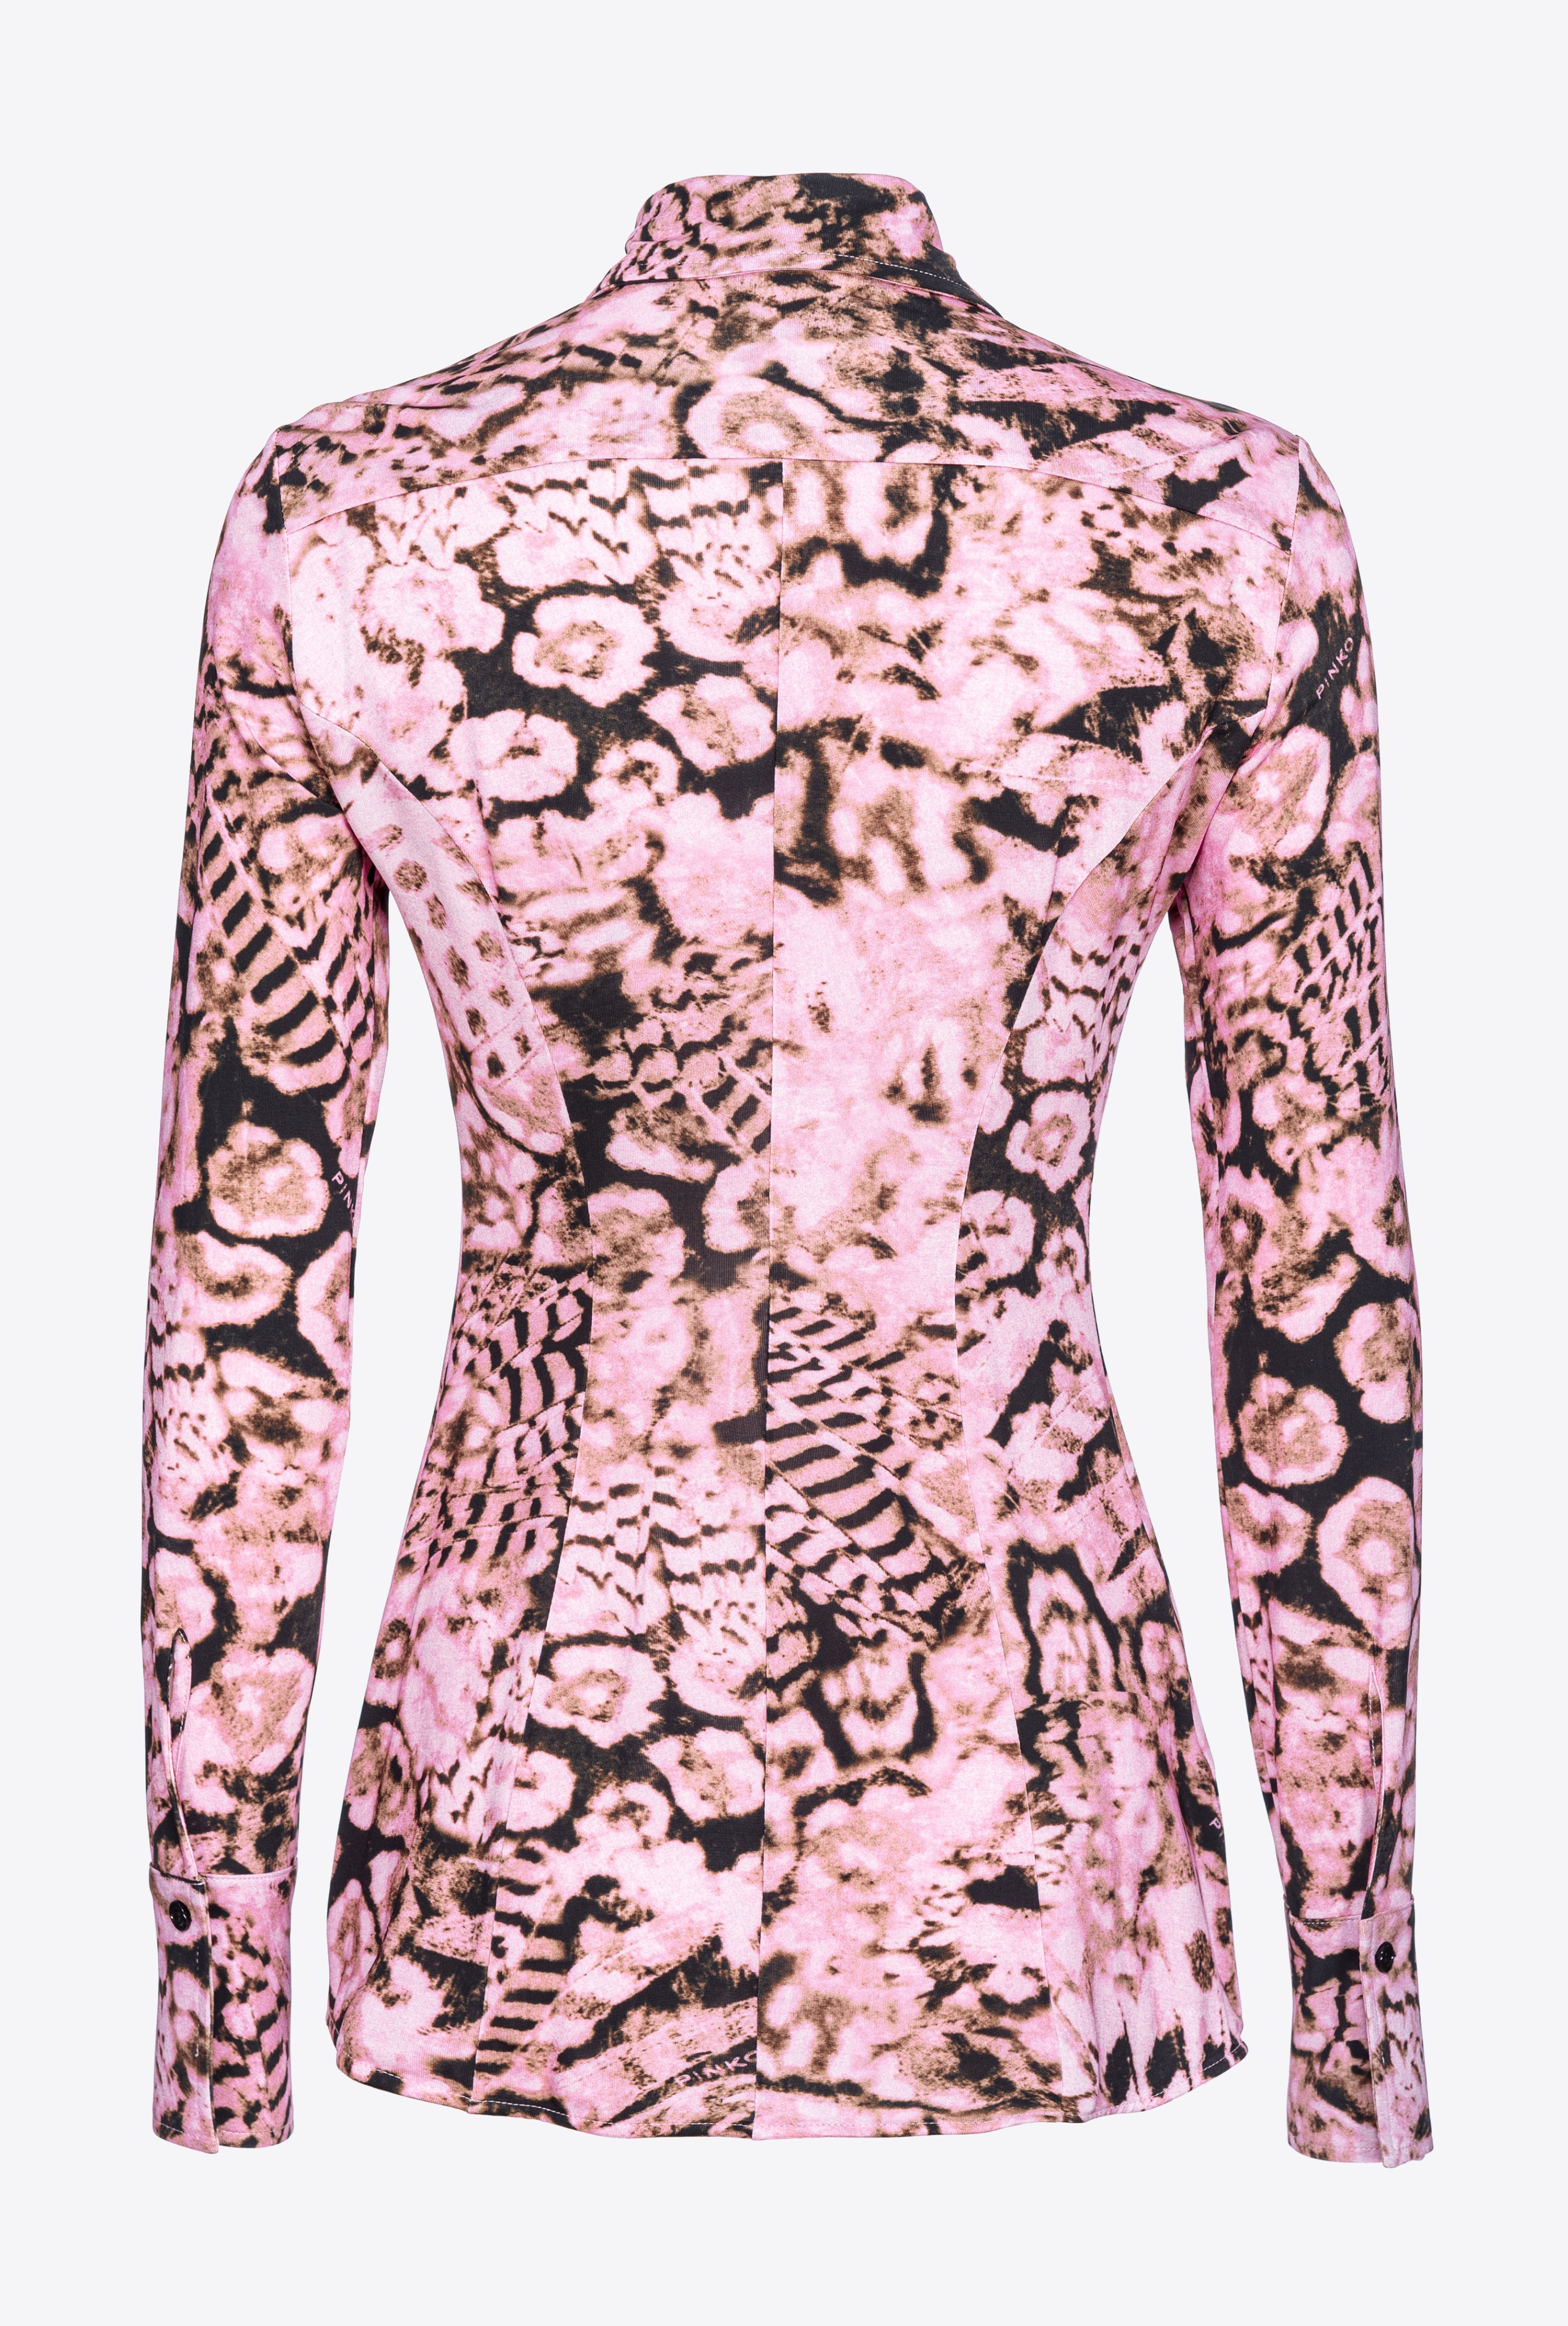 JERSEY SHIRT WITH SCANNER CORAL PRINT - 6